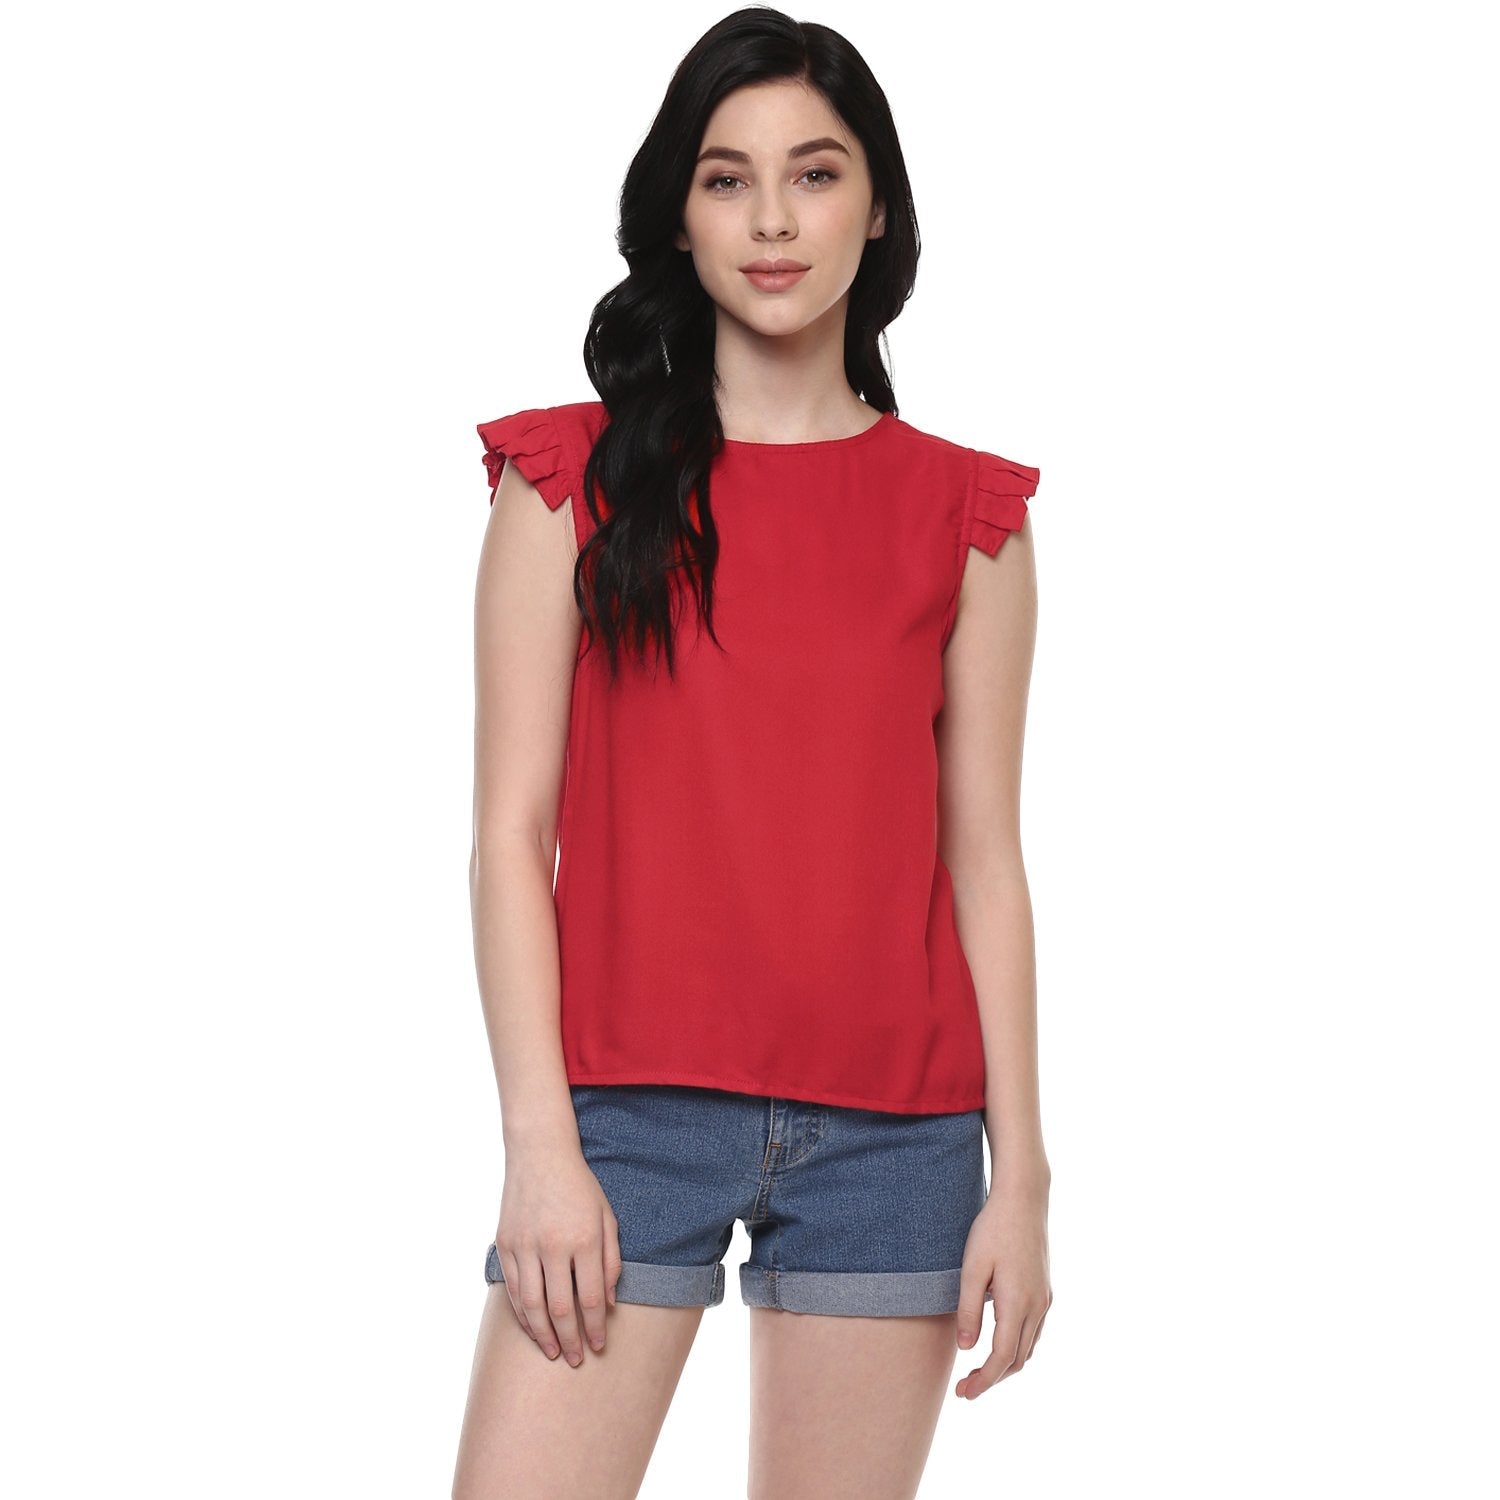 Women's Solid Sleeve Pleat Top - Pannkh